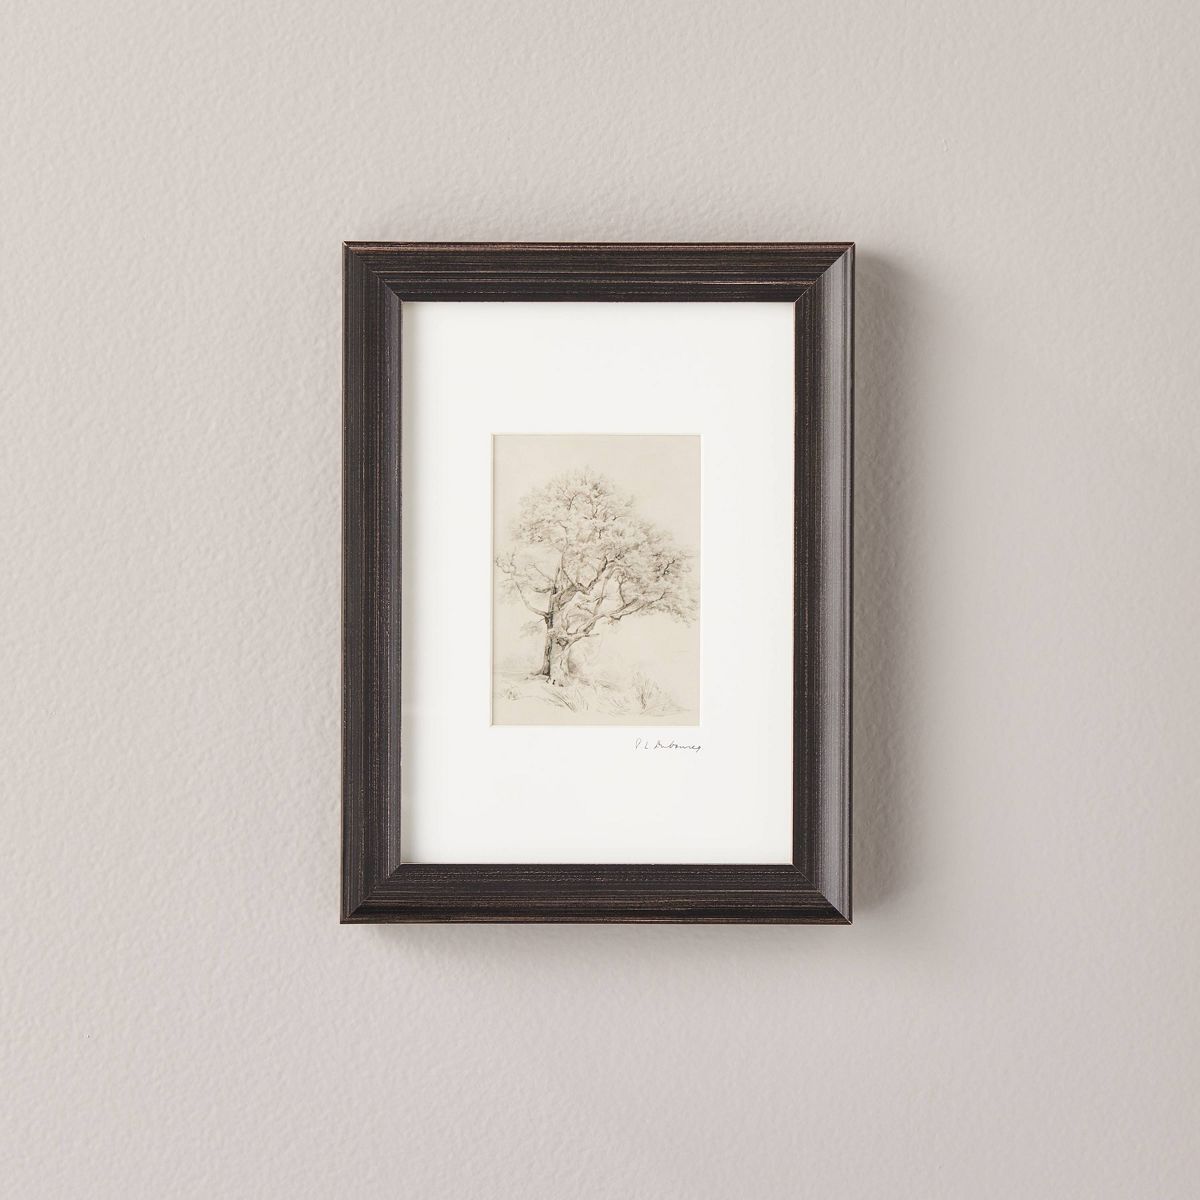 6"x8" Great Oak Tree Sketch Neutral Framed Wall Art - Hearth & Hand™ with Magnolia | Target